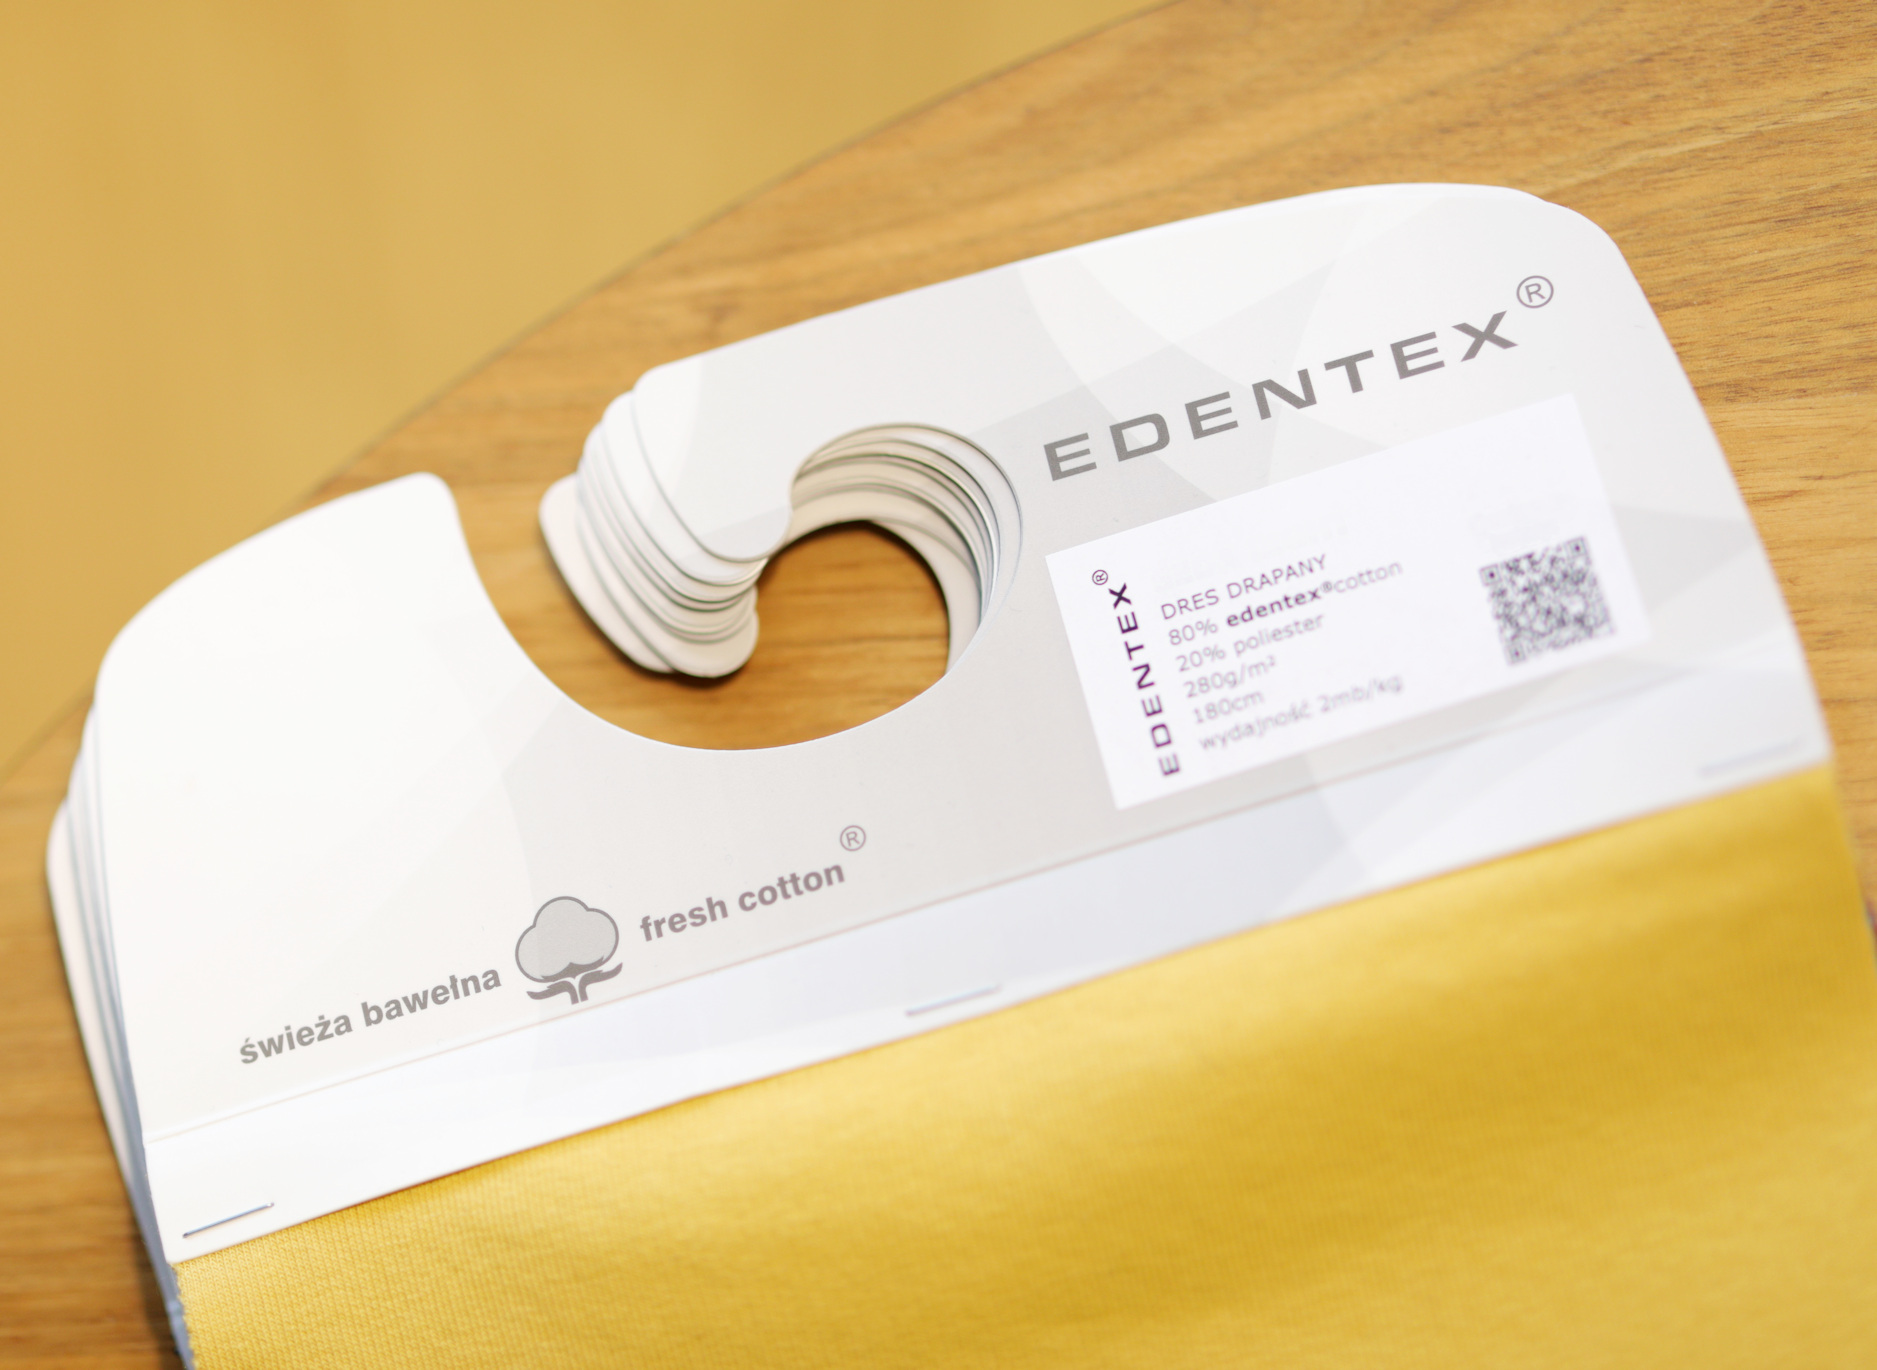 EDENTEX® fabrics is a perfect combination of the best characteristics of high quality cotton with expectations of the most demanding European brands